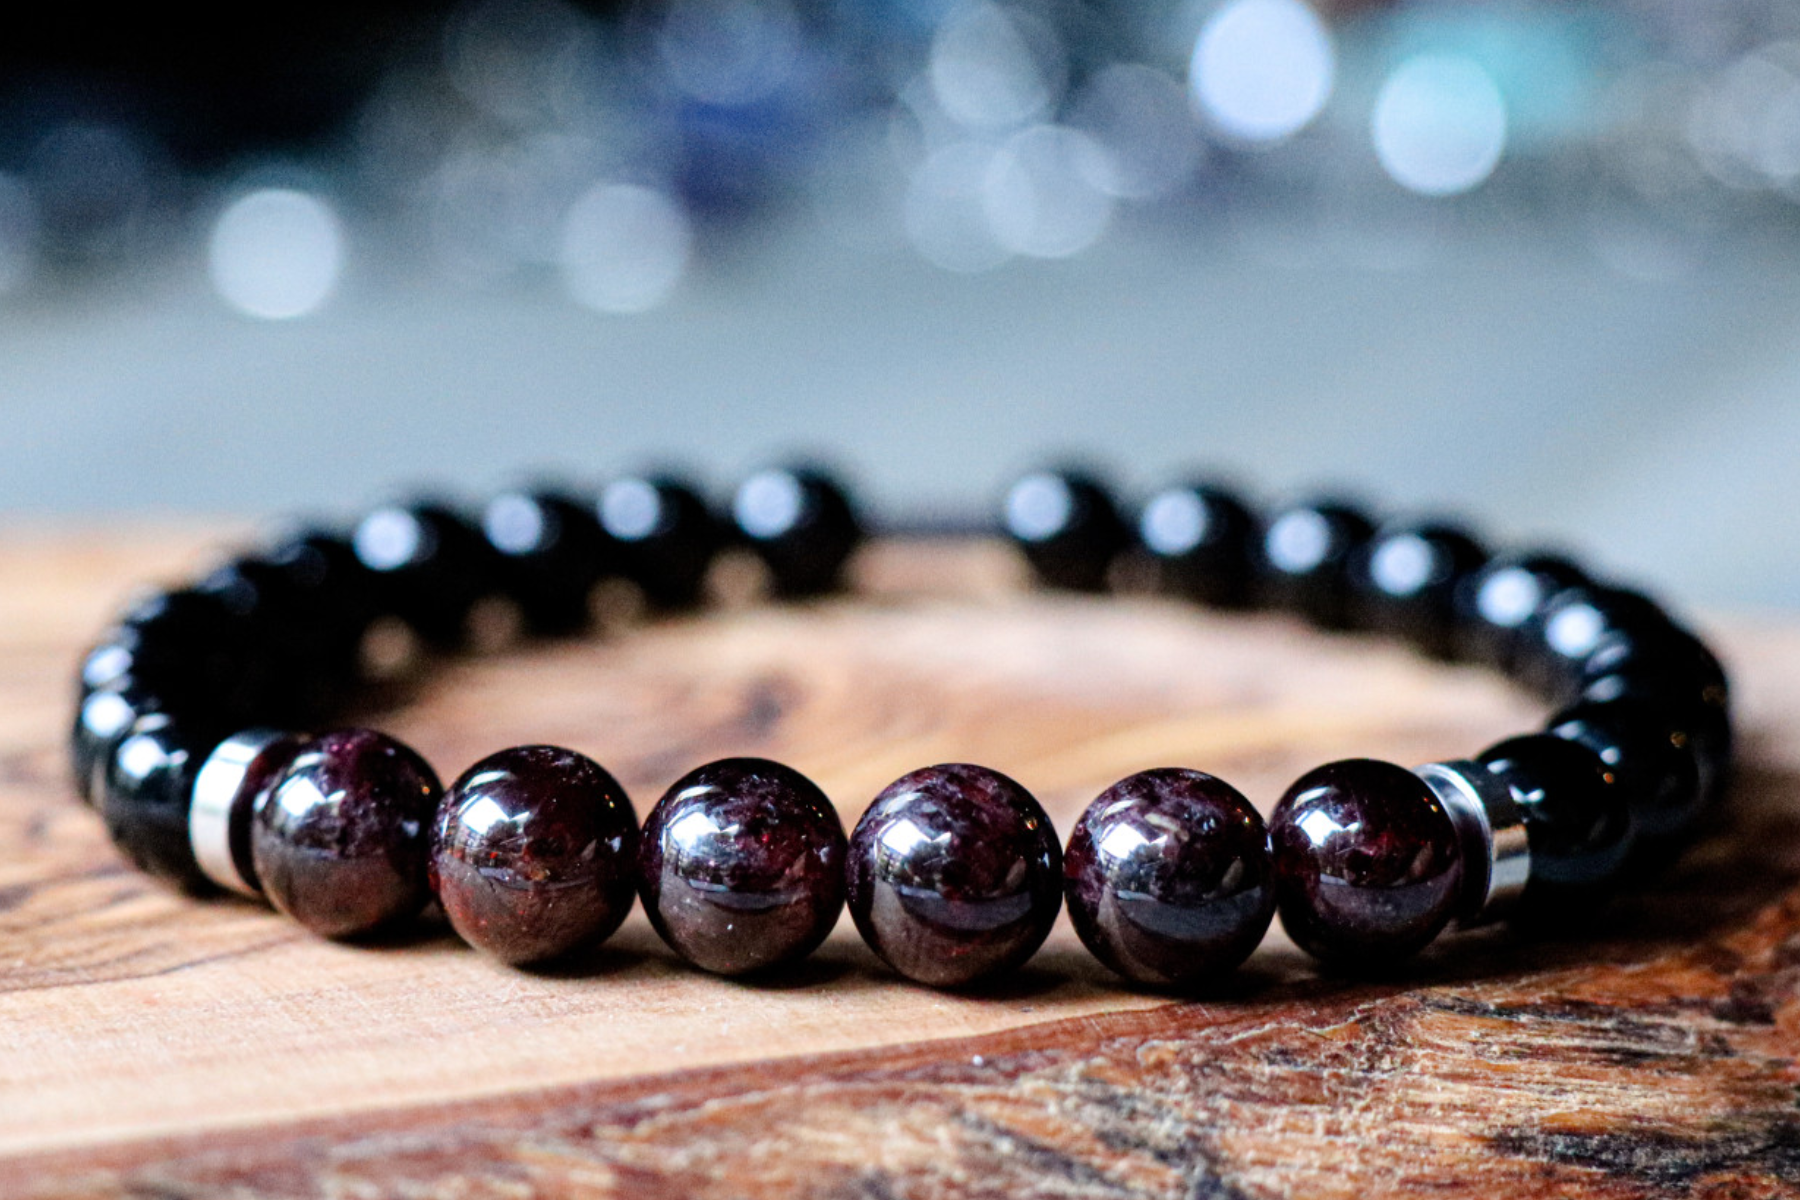 A wooden table with an onyx bracelet